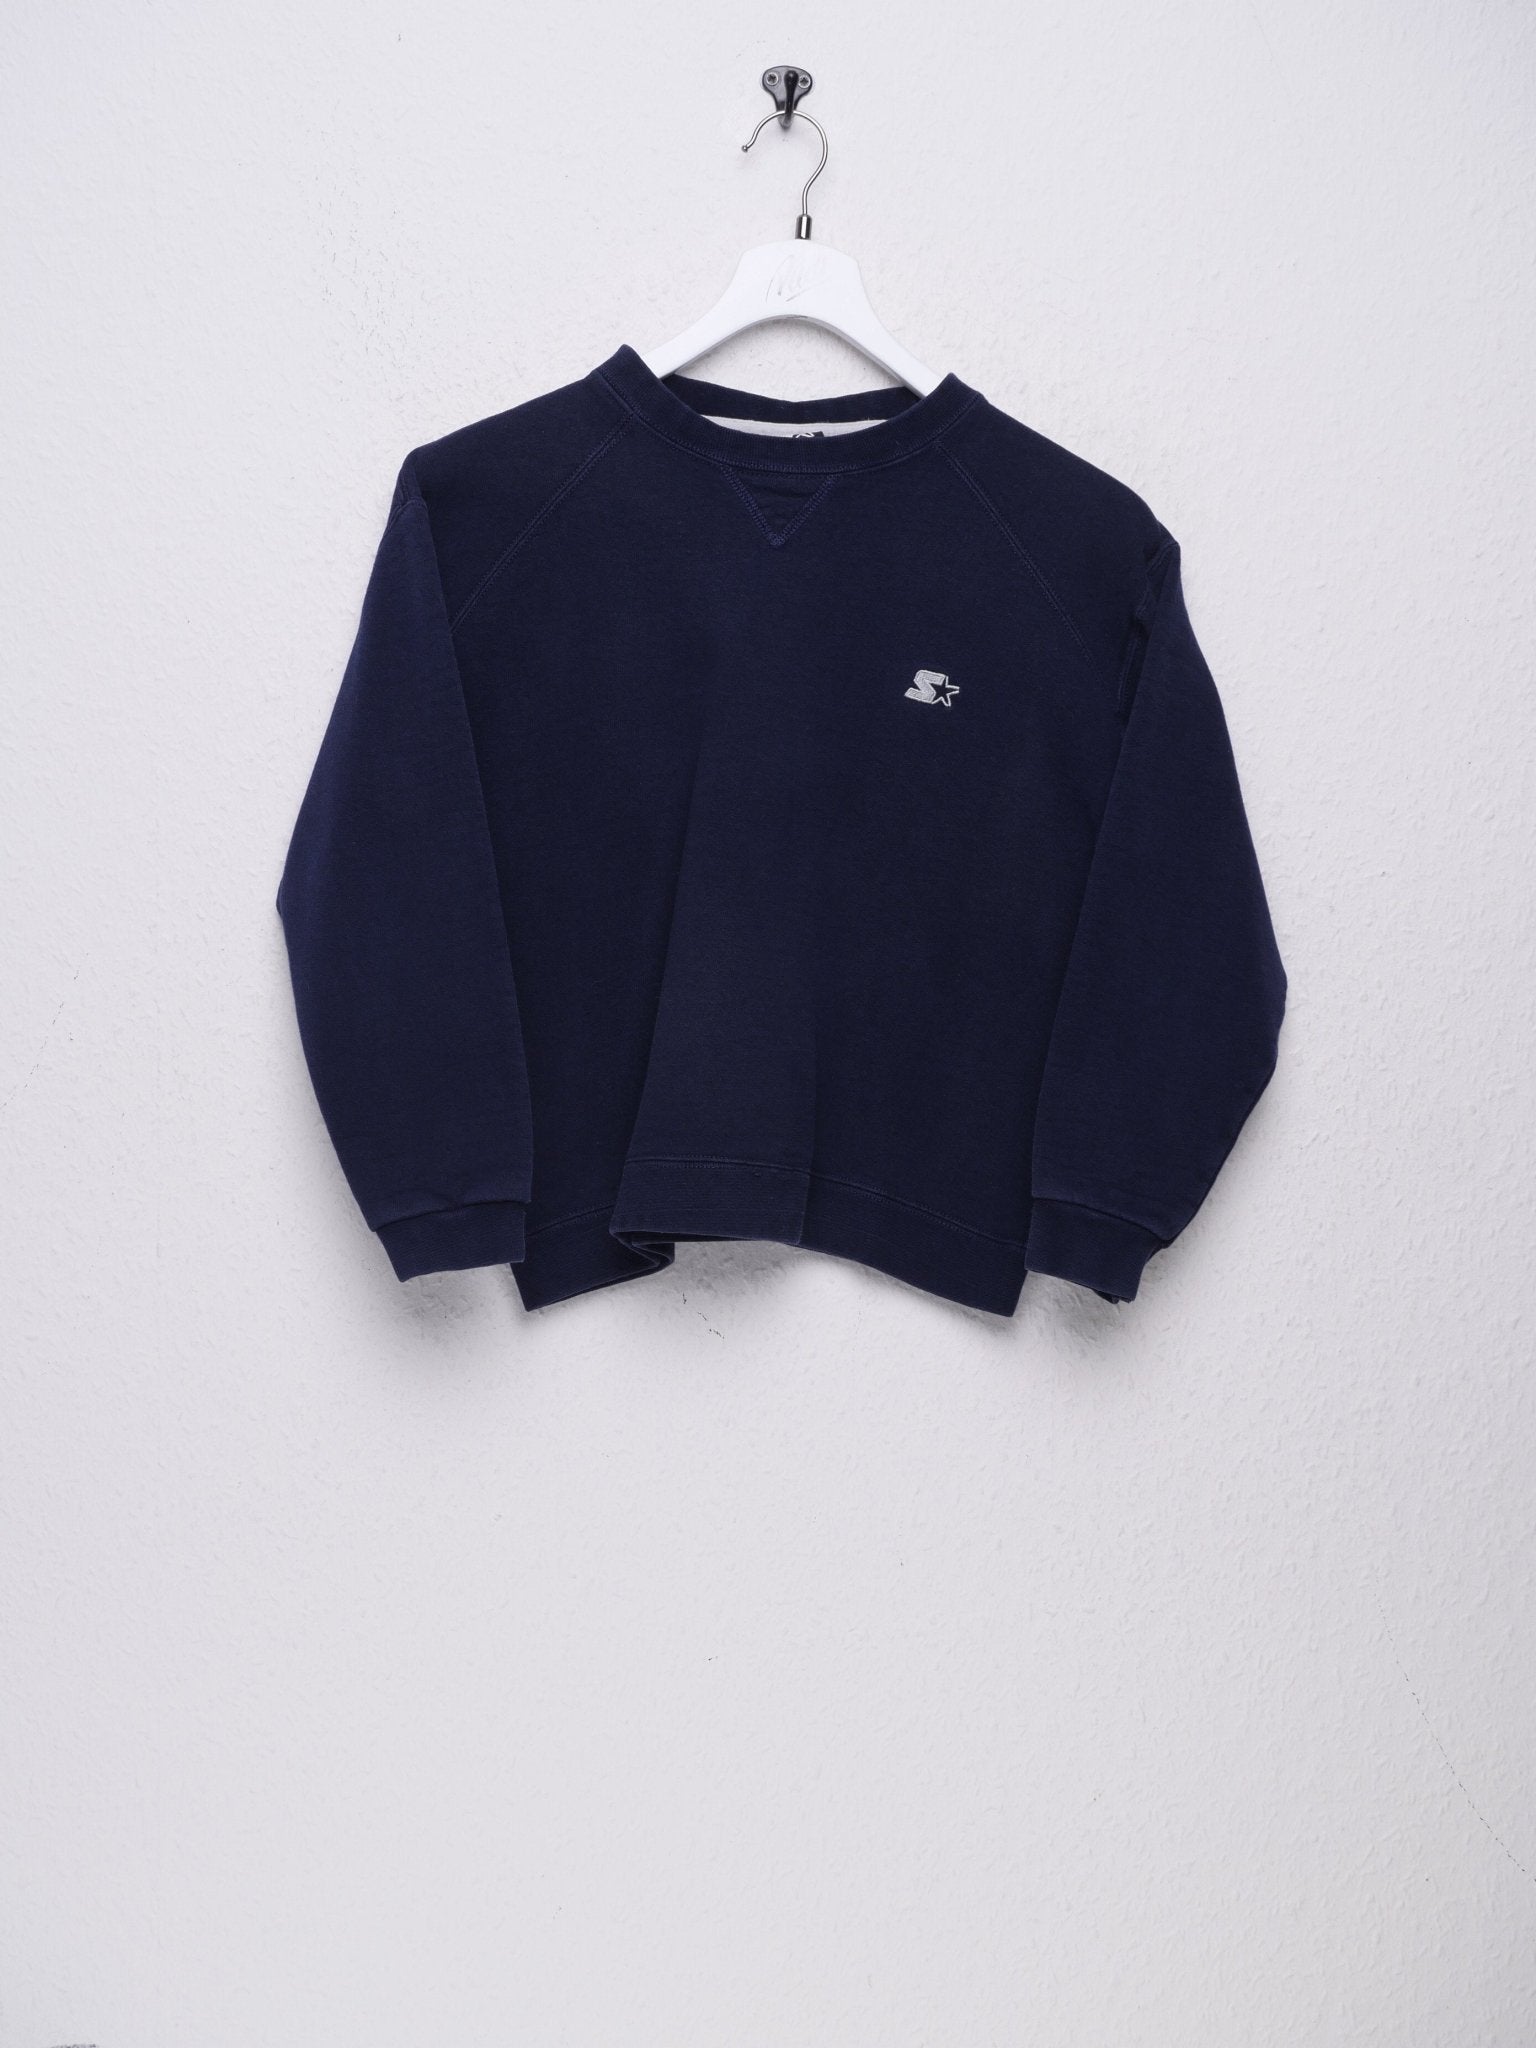 Starter embroidered Logo navy Sweater - Peeces